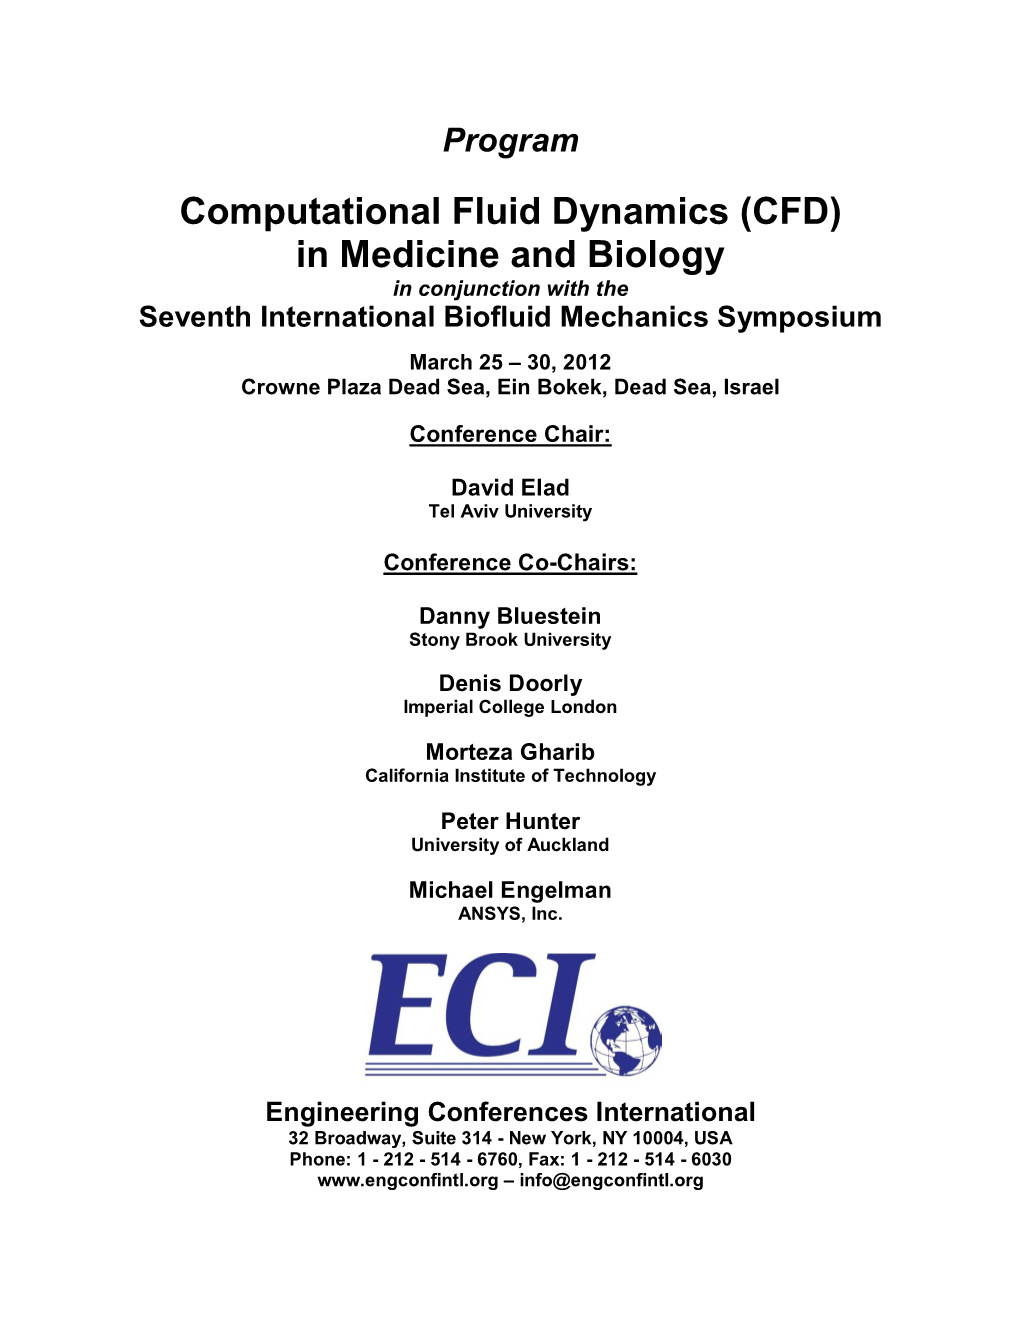 Computational Fluid Dynamics (CFD) in Medicine and Biology in Conjunction with the Seventh International Biofluid Mechanics Symposium